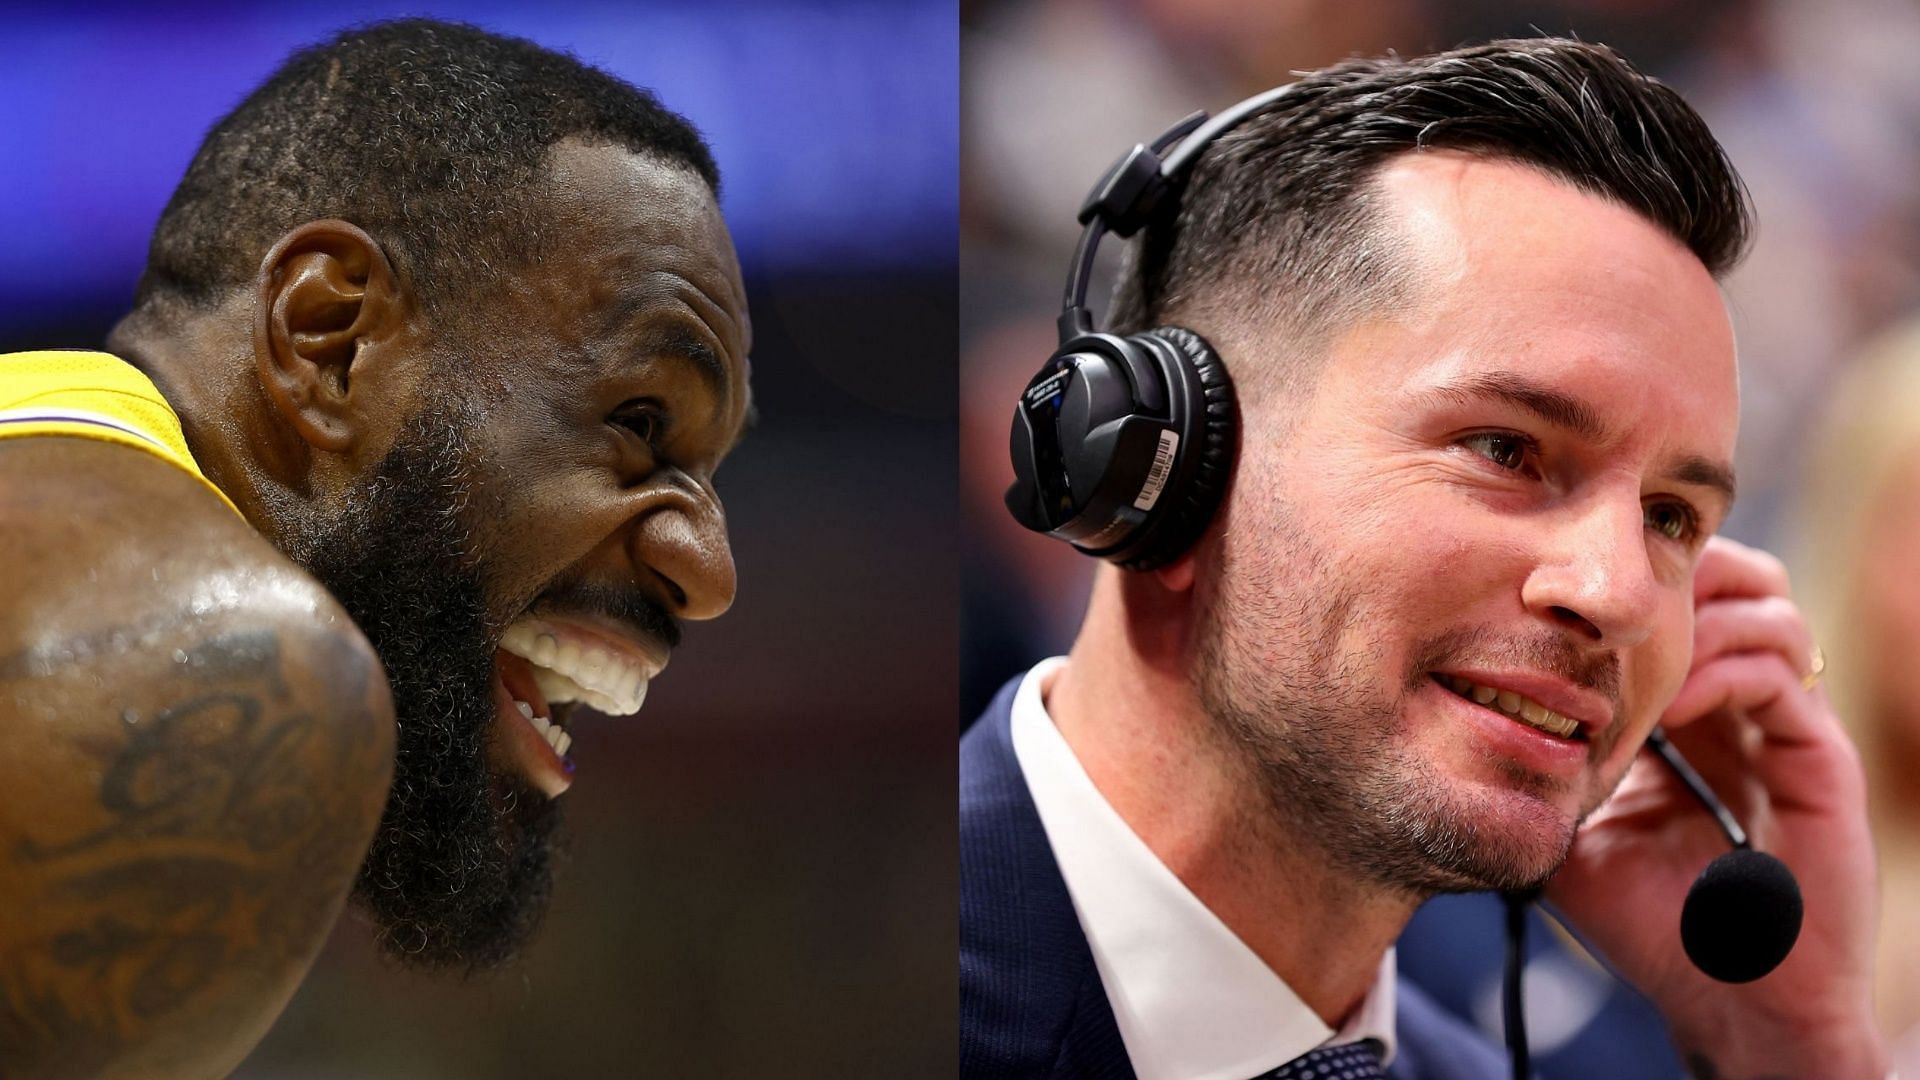 LeBron James hilariously admits to checking out his own highlights while being grilled by JJ Redick